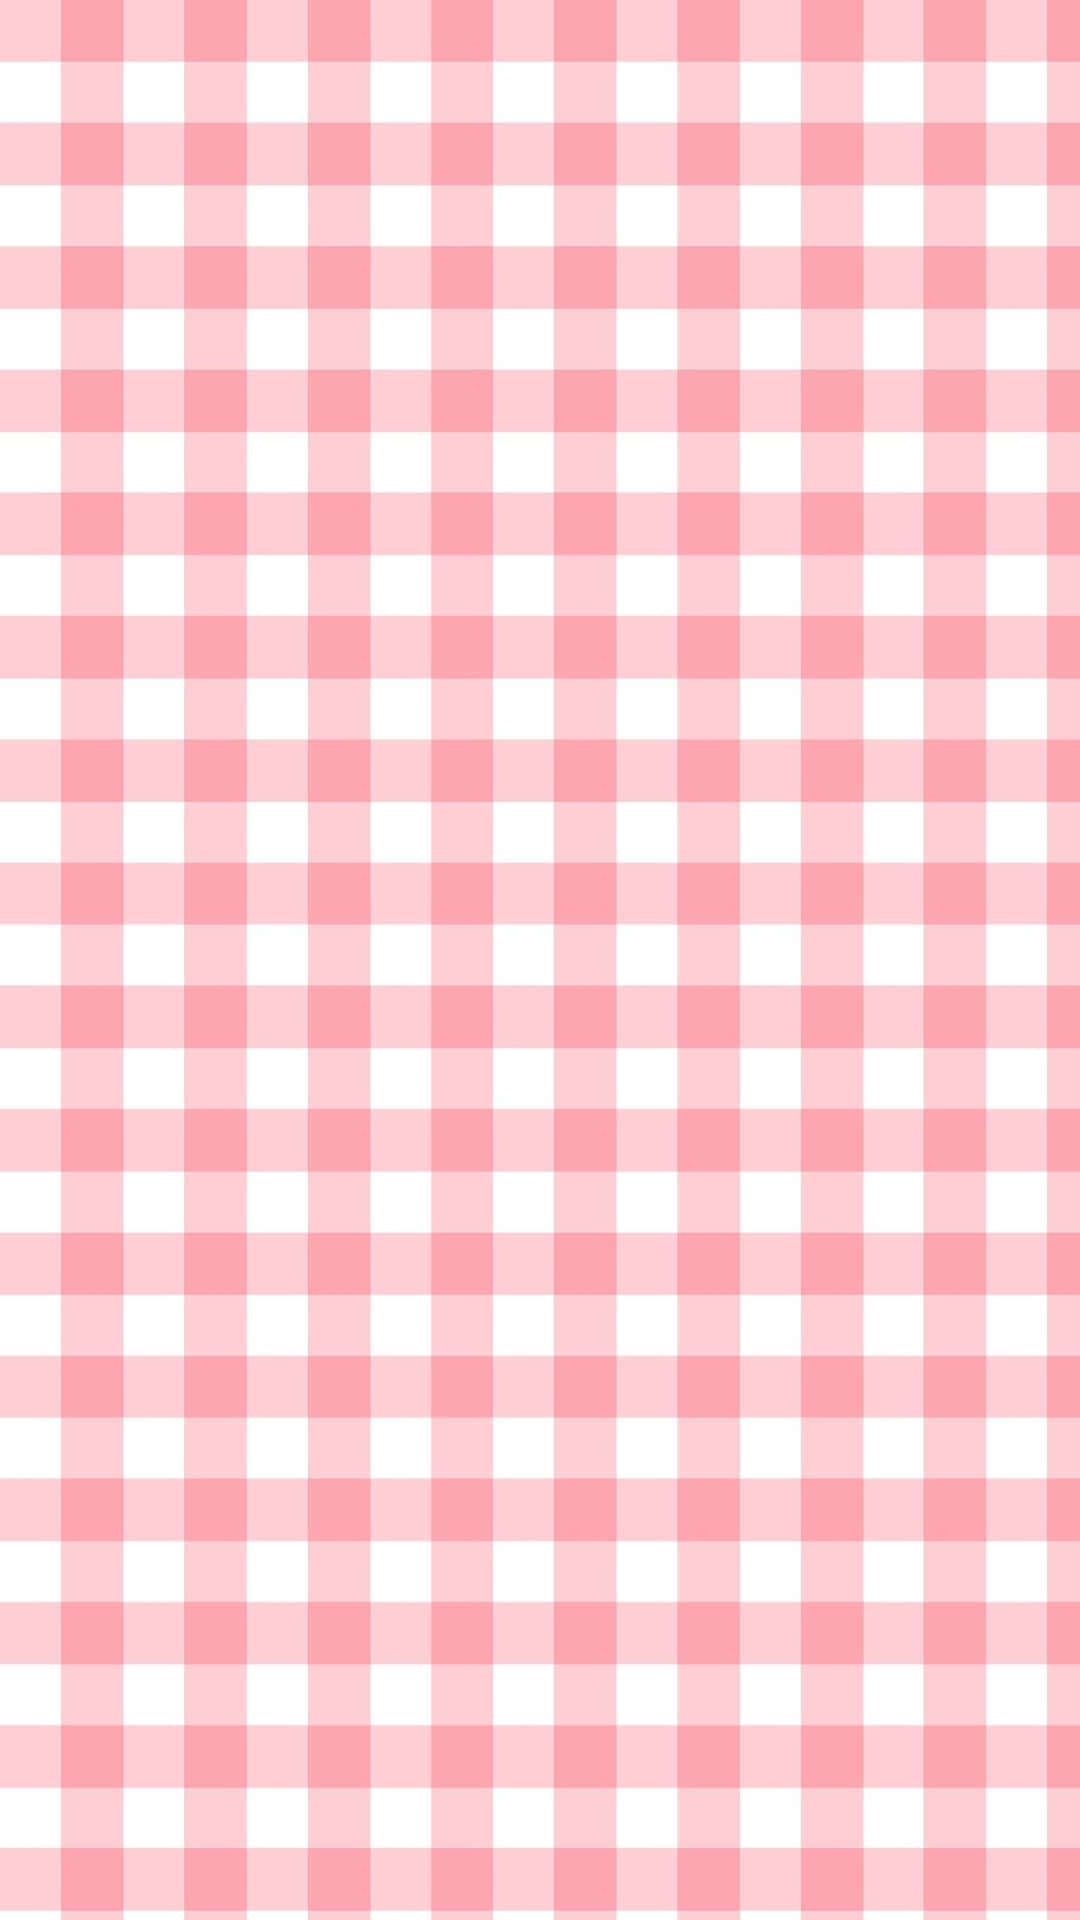 A mesmerizing pink grid with an irresistible hue Wallpaper